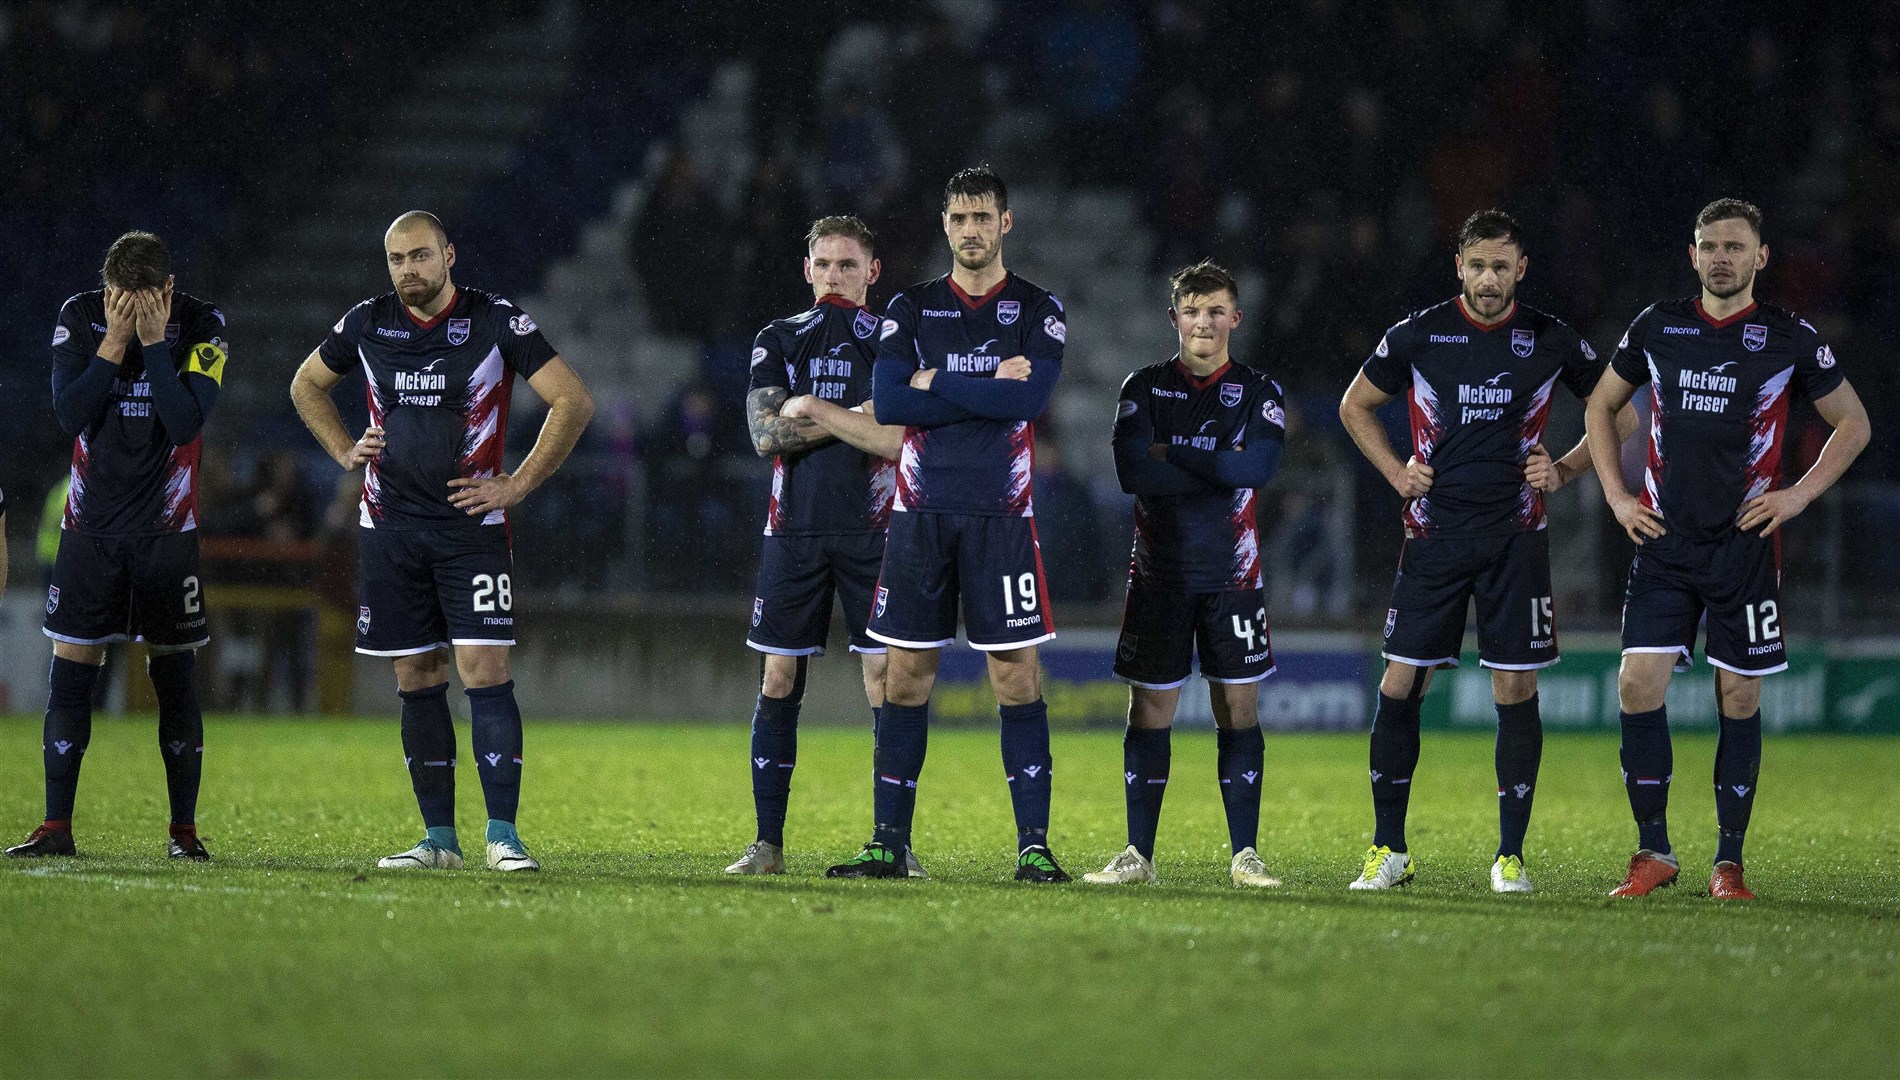 The Staggies suffered the agony of being knocked out of the Scottish Cup on penalties in the last derby match.